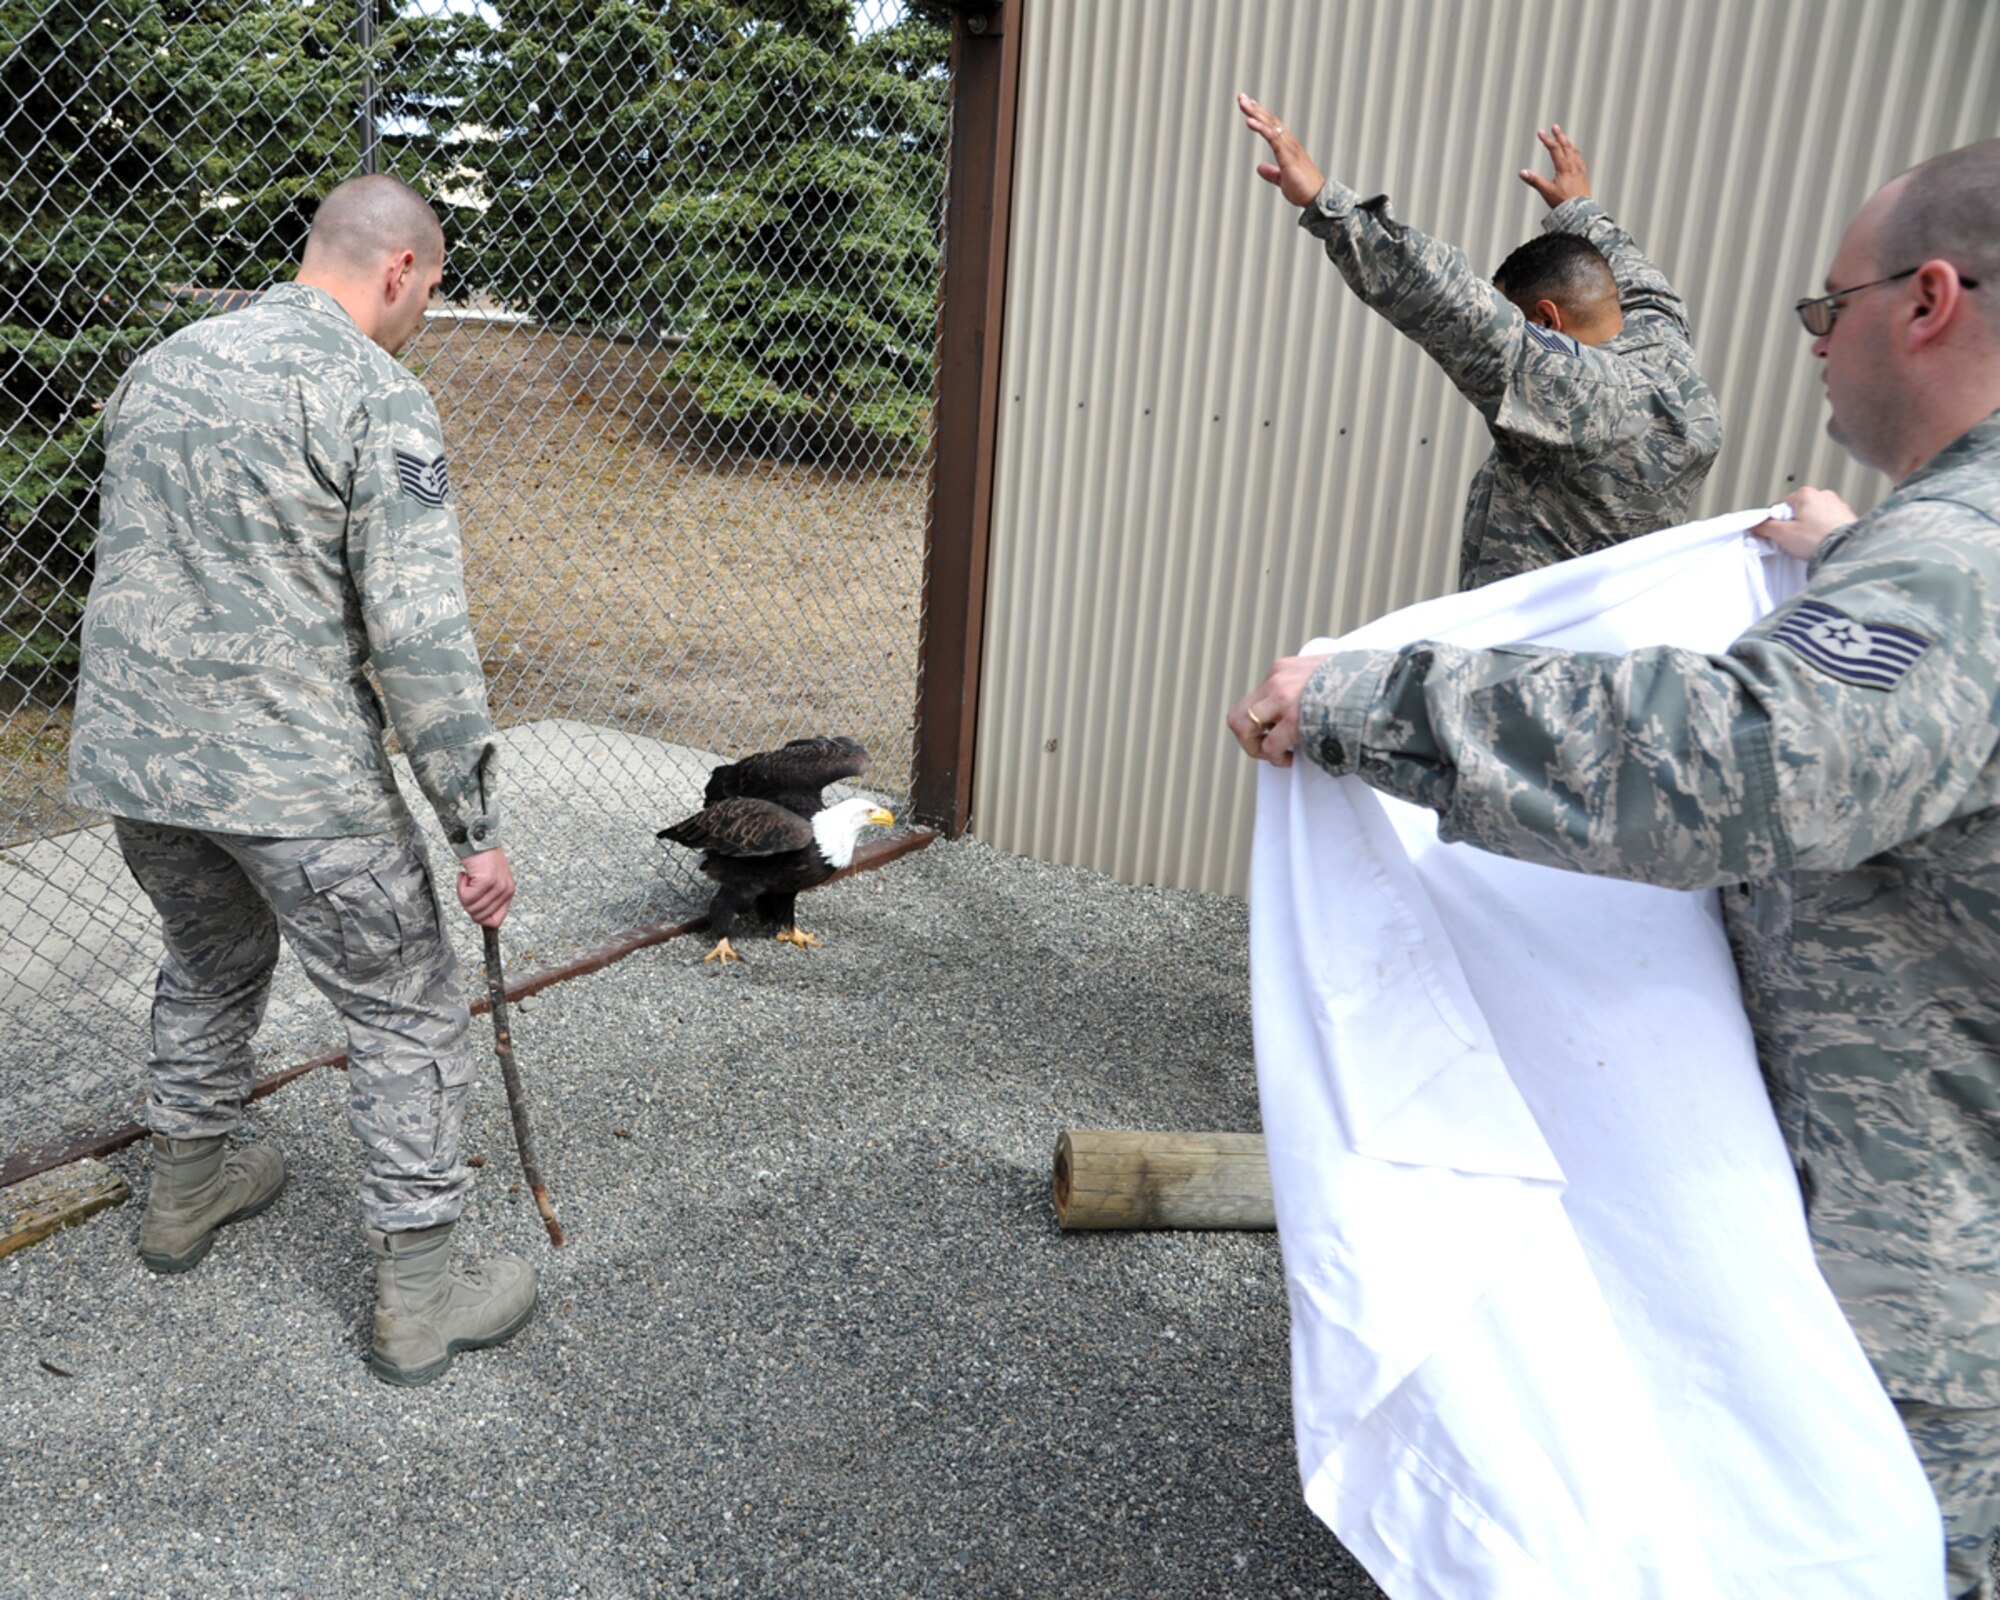 130511-F-IY975-007: JOINT BASE ELMENDORF-RICHARDSON, Alaska -- Tech. Sgt. Timothy Ayers, 3rd Munitions Squadron, Master Sgt. Vic Rounds, 381st Intelligence Squadron, and Tech Sgt. Eric Richards, 3rd Maintenance Operations Squadron, prepare to capture Notch Wing, one of the two Bald Eagles that reside in the Joint Base Elmendorf-Richardson eagle cage, in order to clean the cage May 11. The three are part of a group of volunteers who maintains the cage and cares for the eagles, which have been injured and are not able to survive in the wild. (U.S. Air Force photo/Senior Airman Blake Mize)